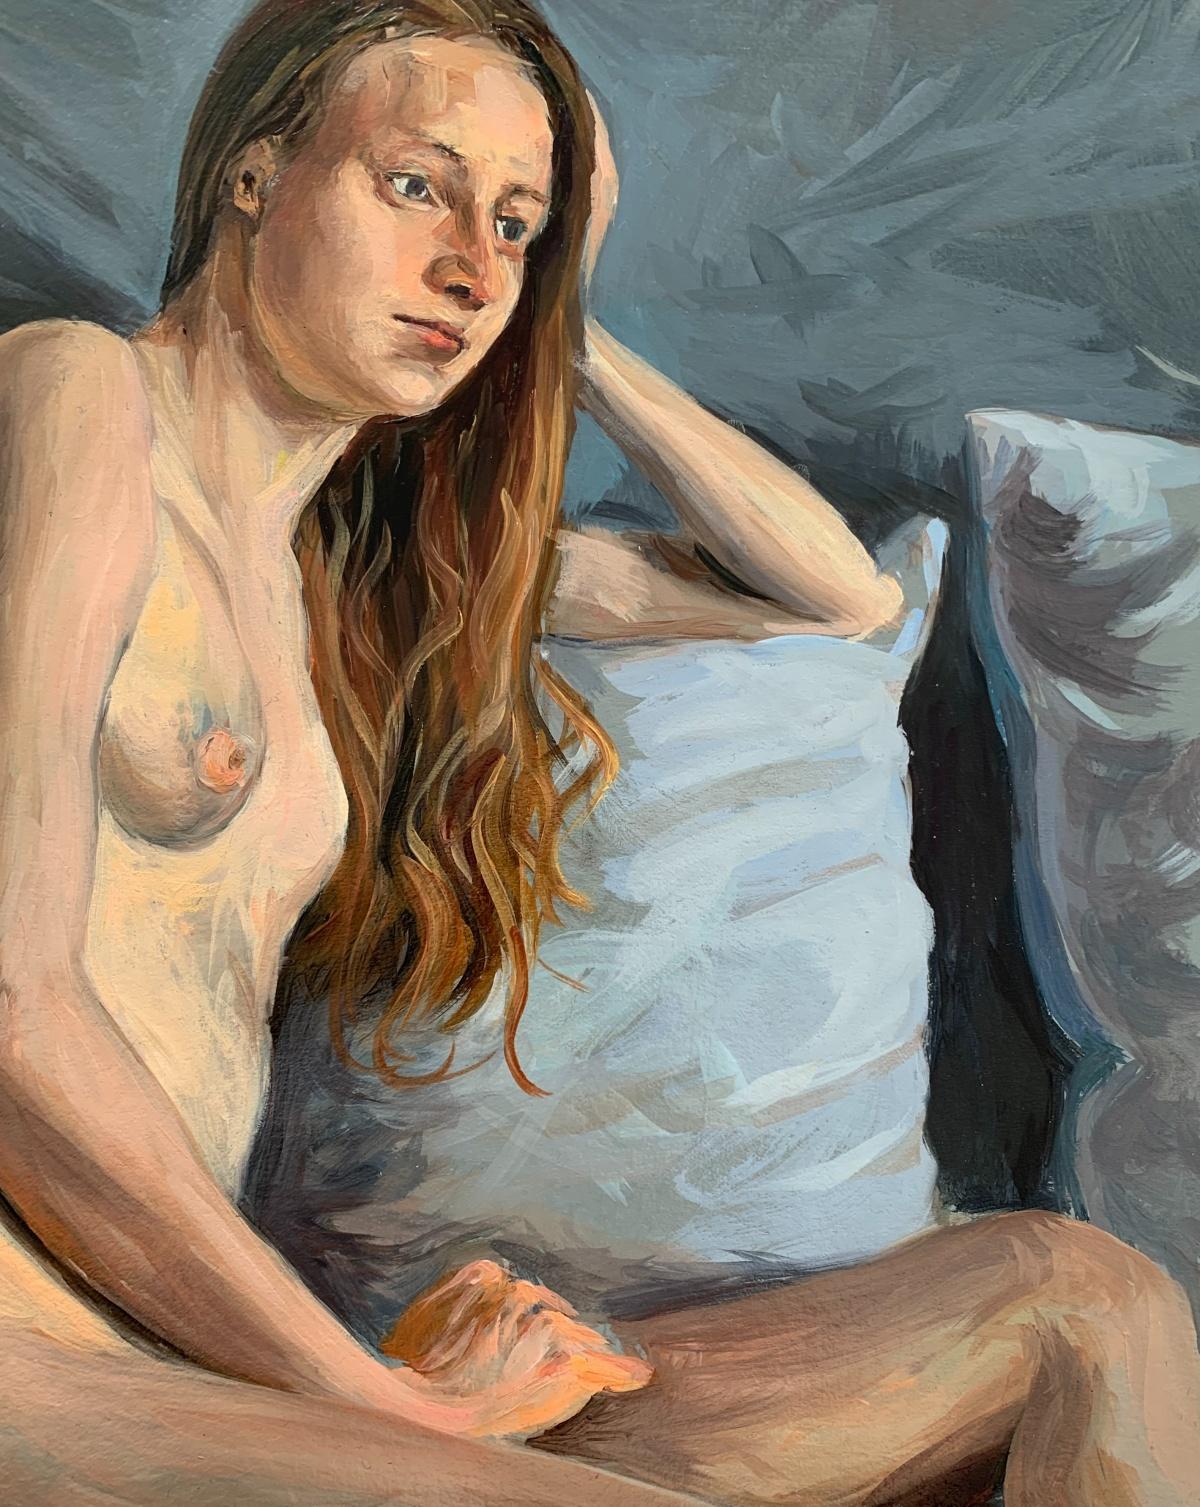 Nude with pillow - Realistic oil painting, Warm tones, Young Polish artist - Gray Nude Painting by Agnieszka Staak-Janczarska